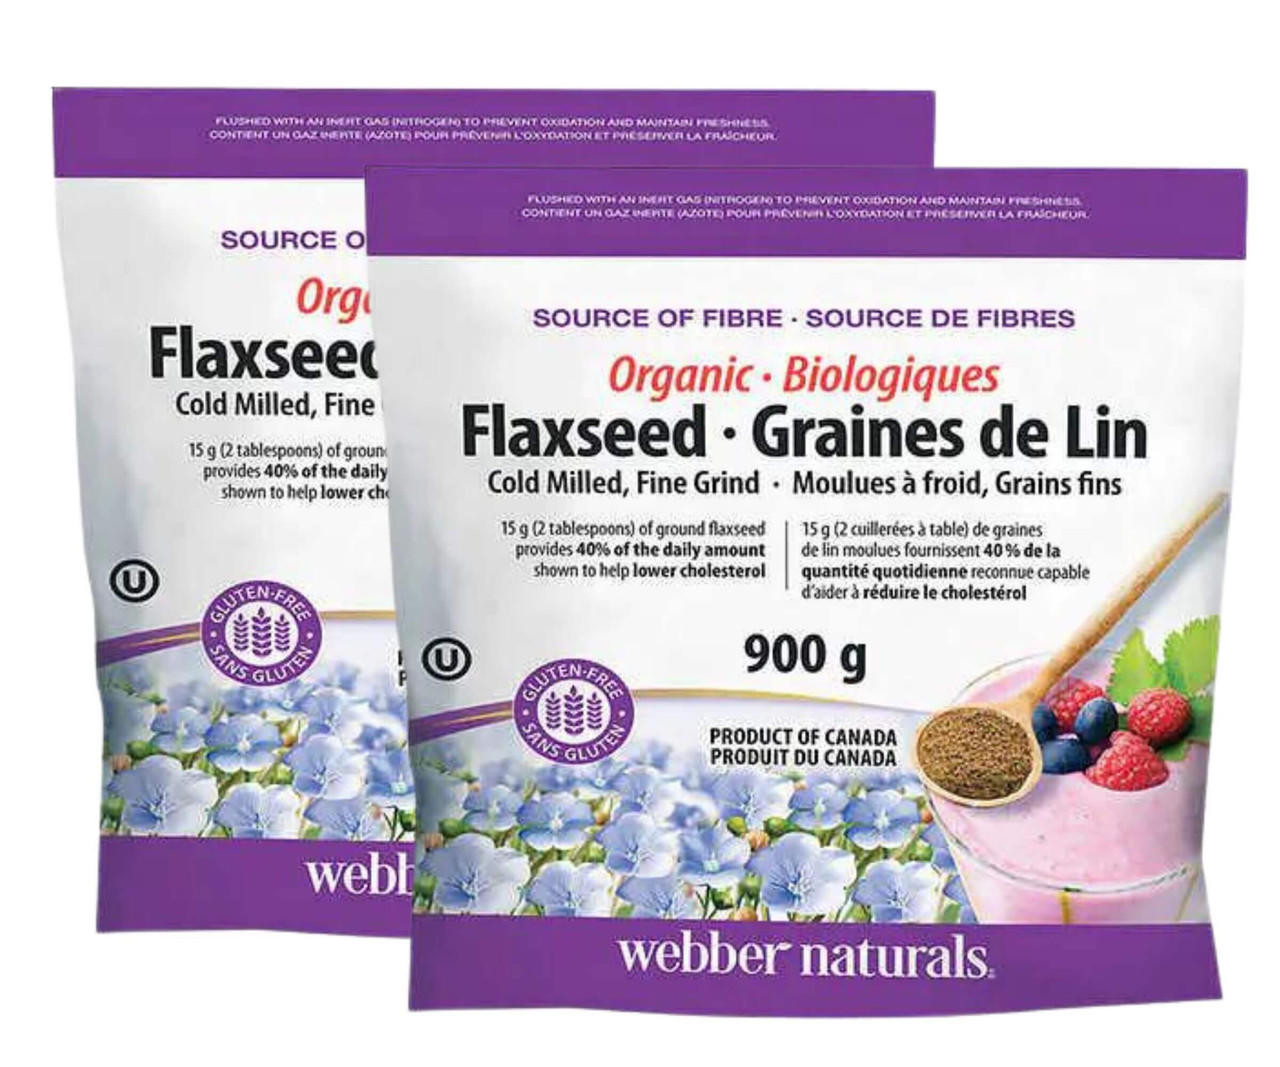 webber naturals Webber Naturals Organic Ground Flaxseed, 900 g, 2-Pack | Nutrient-Rich Flaxseed for a Healthy Diet 